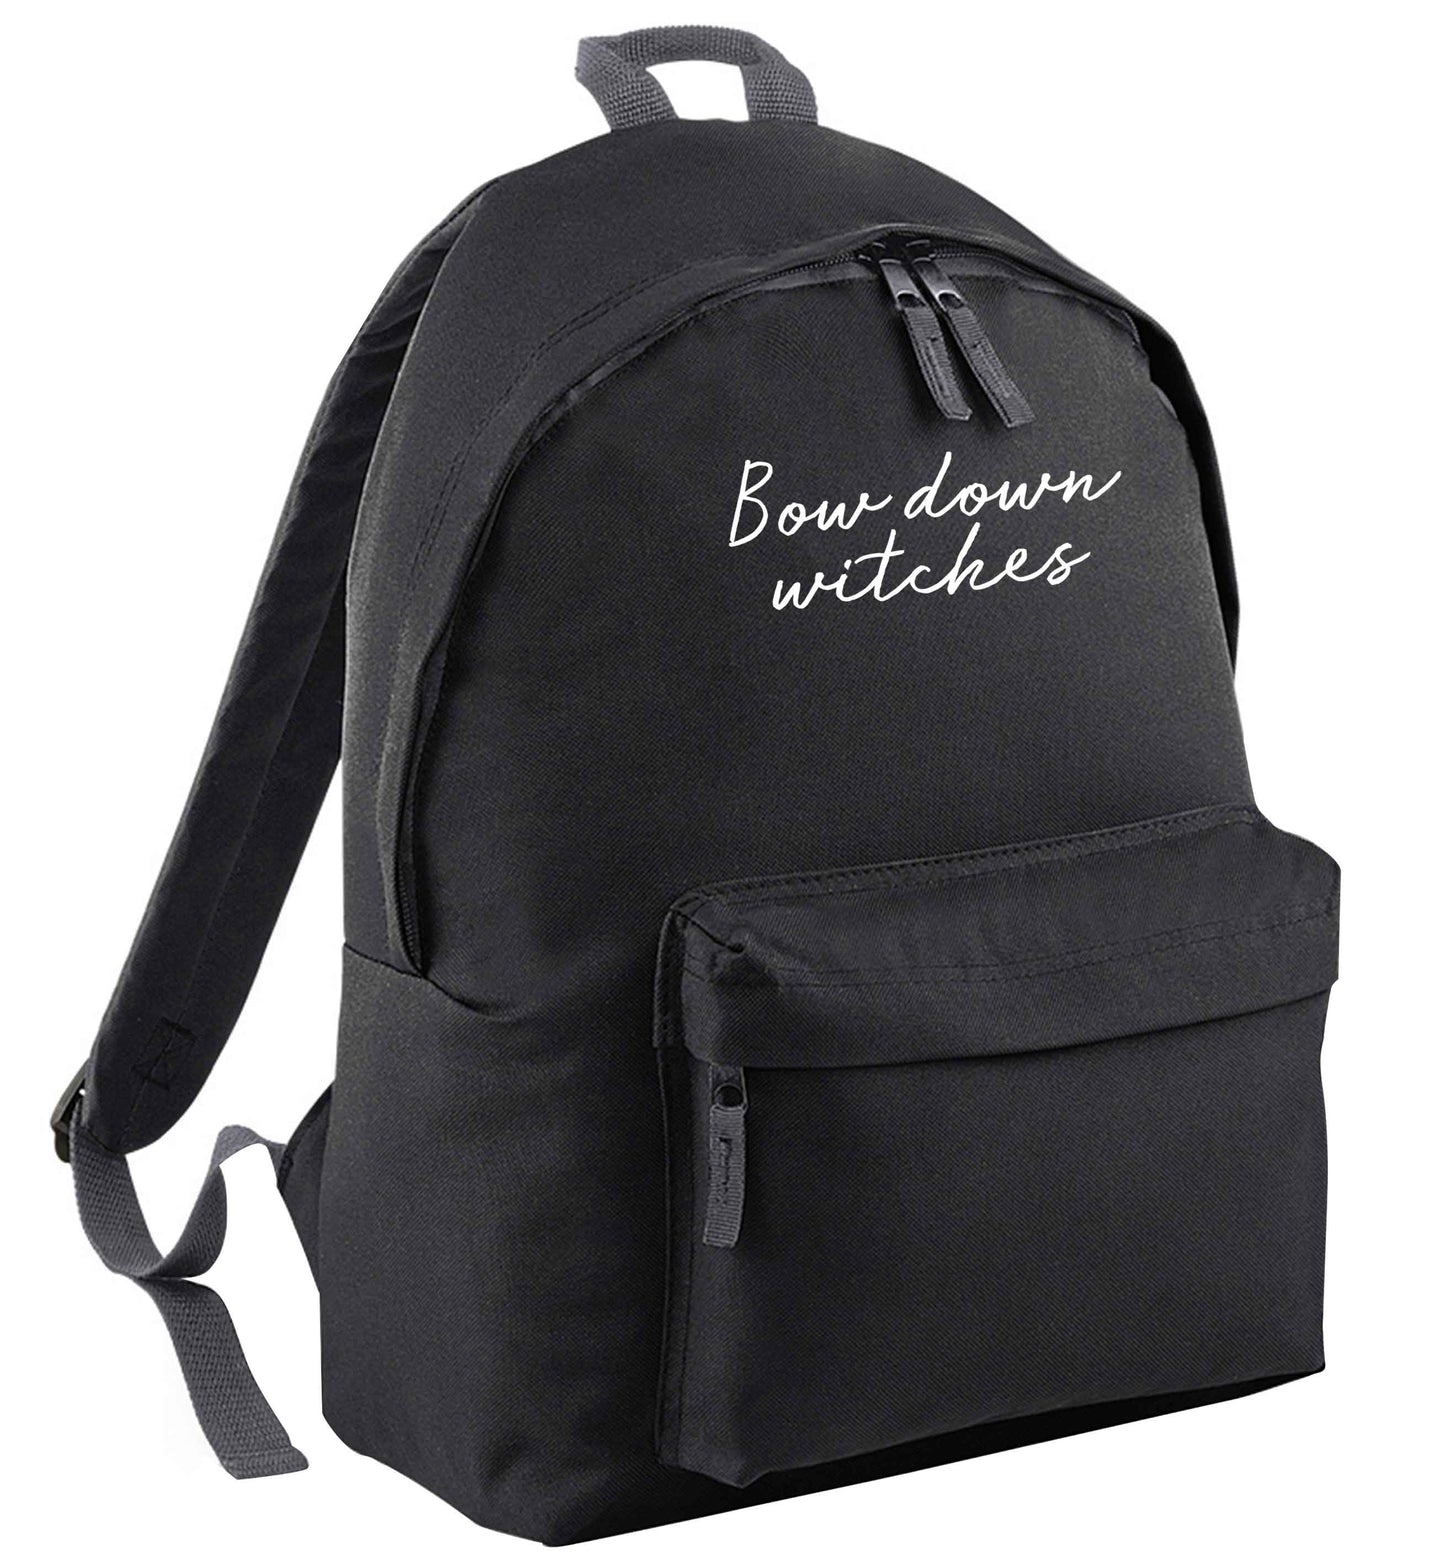 Bow down witches | Children's backpack